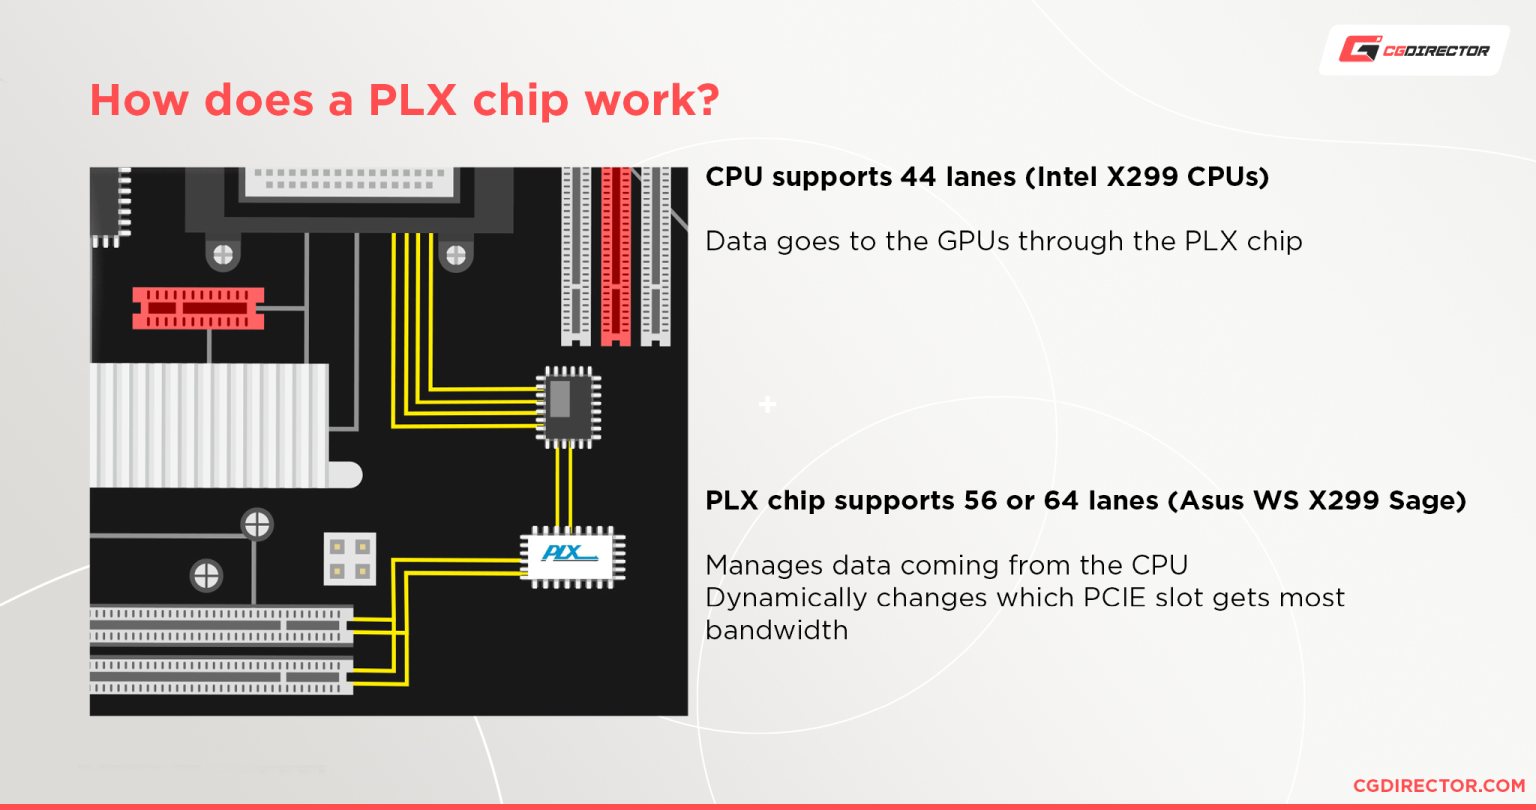 How do PLX chips work on a Motherboard